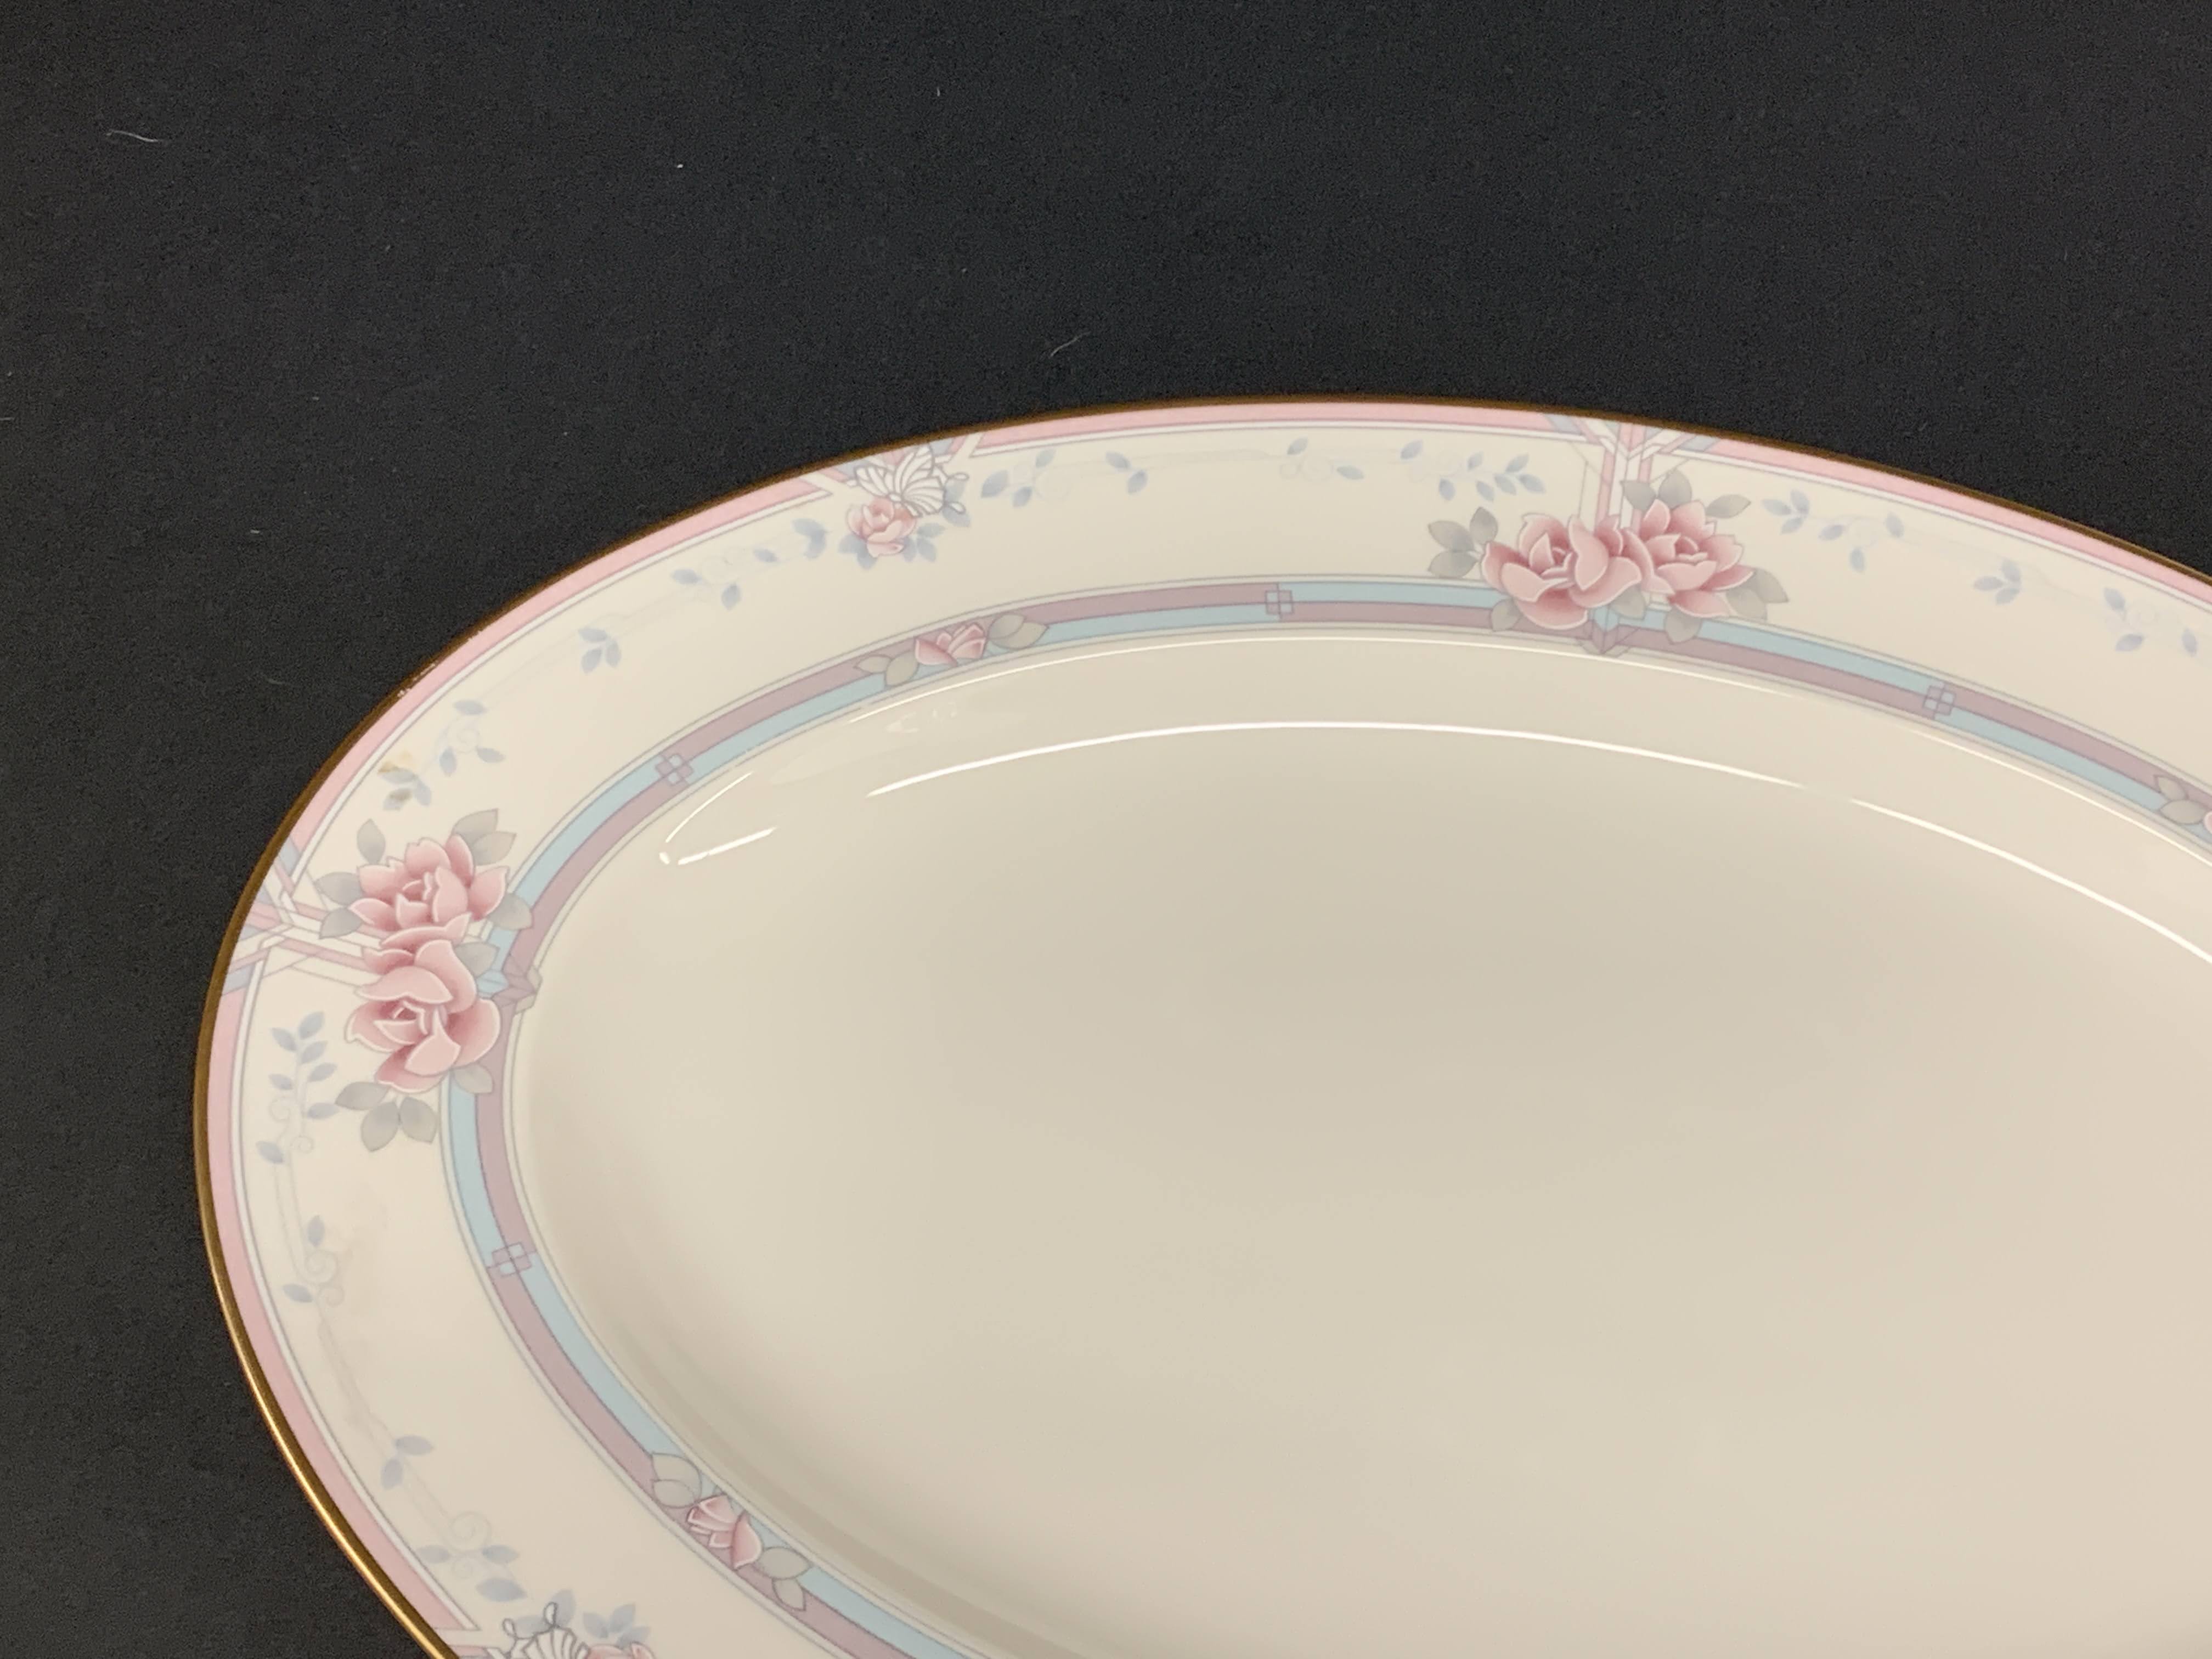 Noritake Magnificence - Porcelain Fine China - Ivory Pink Color Gold Band - Oval Platter 12 to 15"